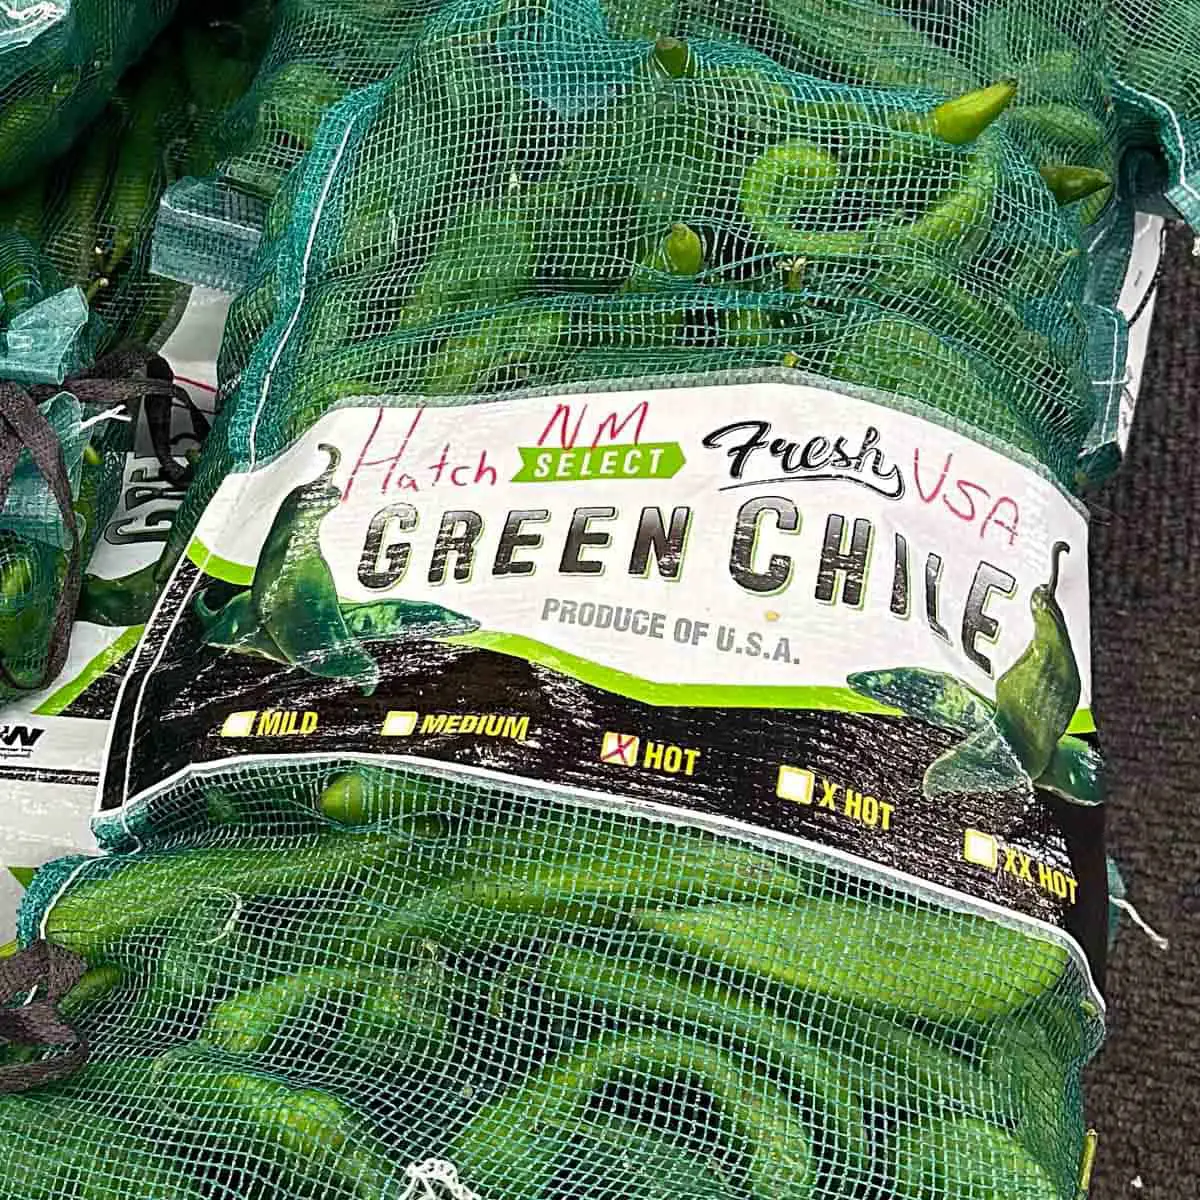 A large bag containing Hatch Green Chiles.